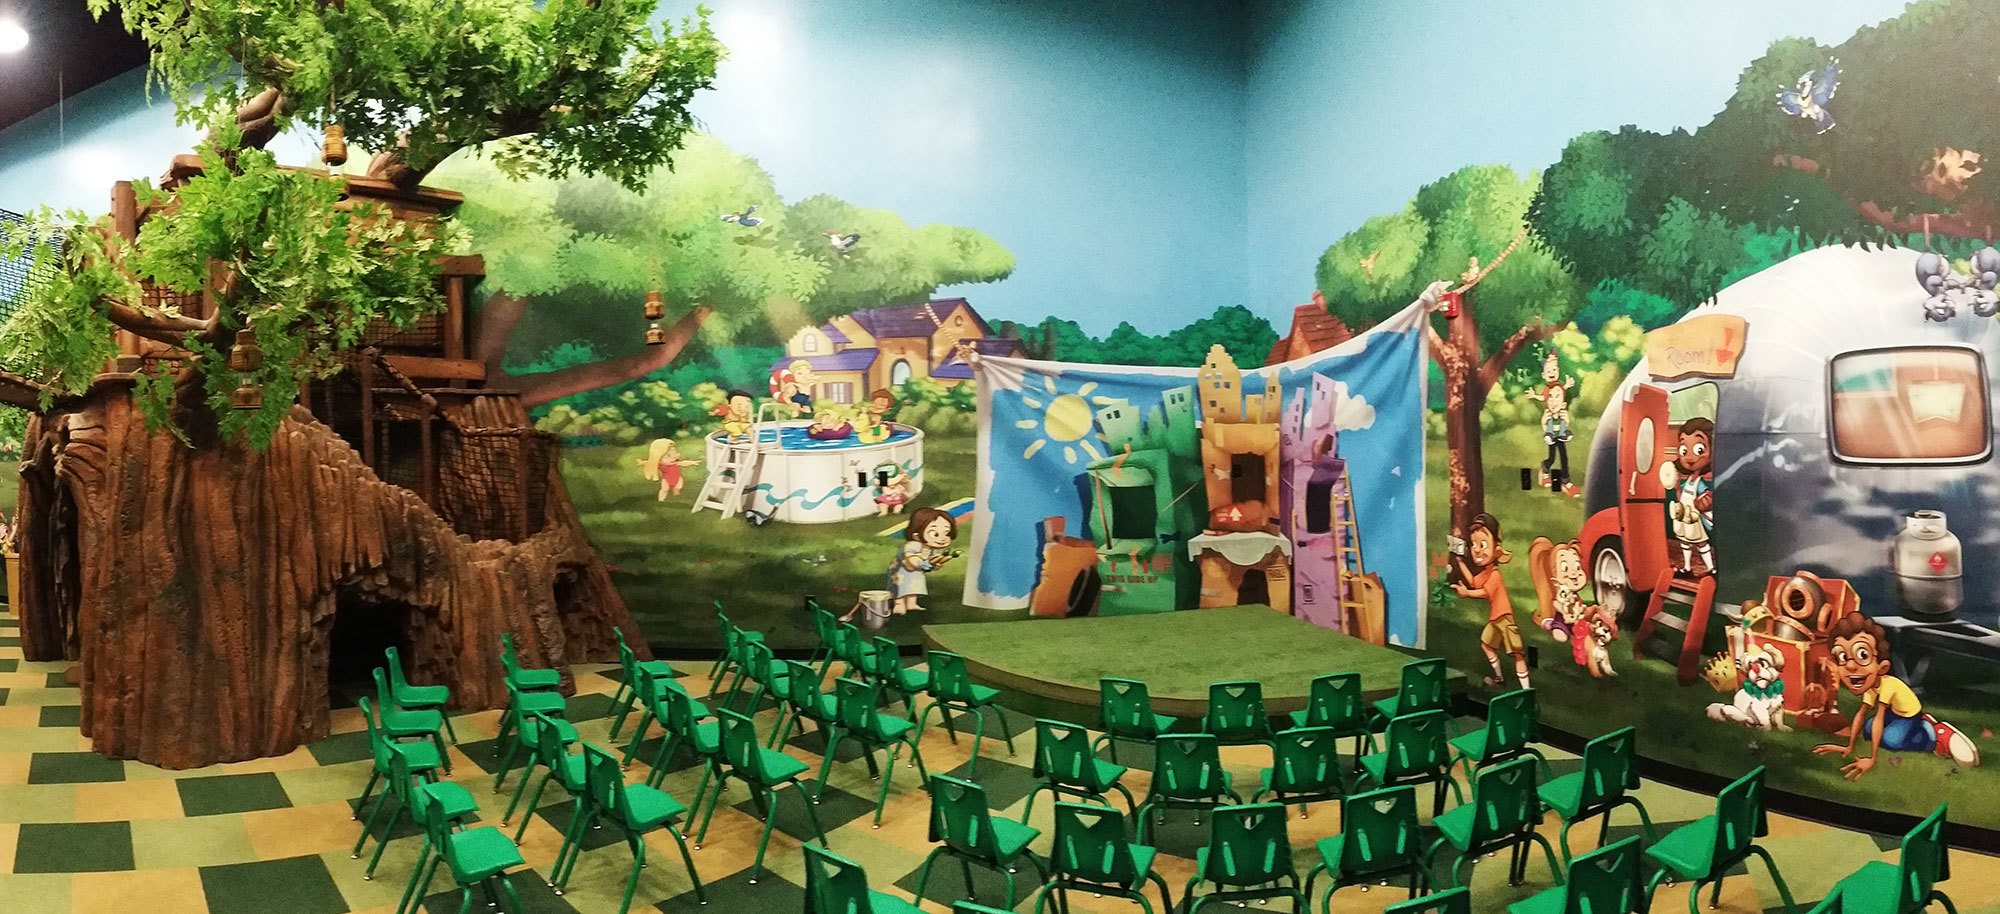 Neighborhood Backyard Treehouse Themed Space with backyard wall mural backdrop, 3D sculpted tree and small quarter circle stage at Choose Life Church